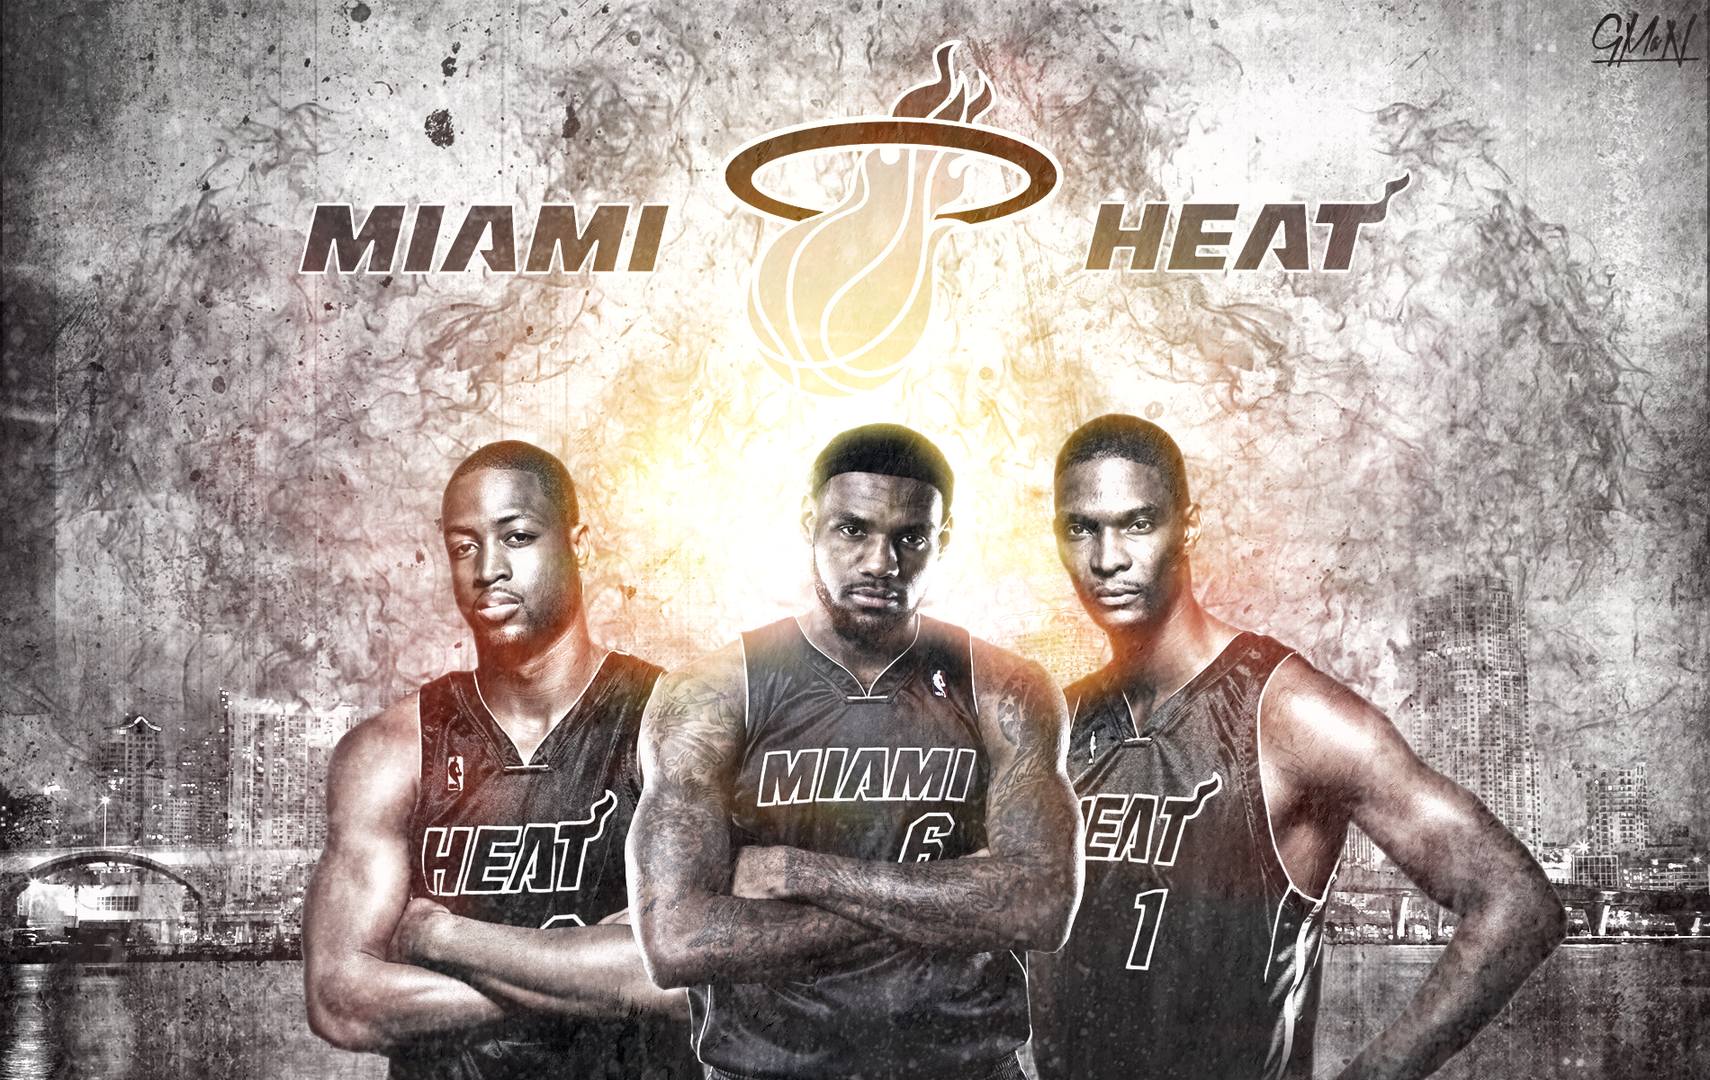 Miami Heat wallpapers hd free download